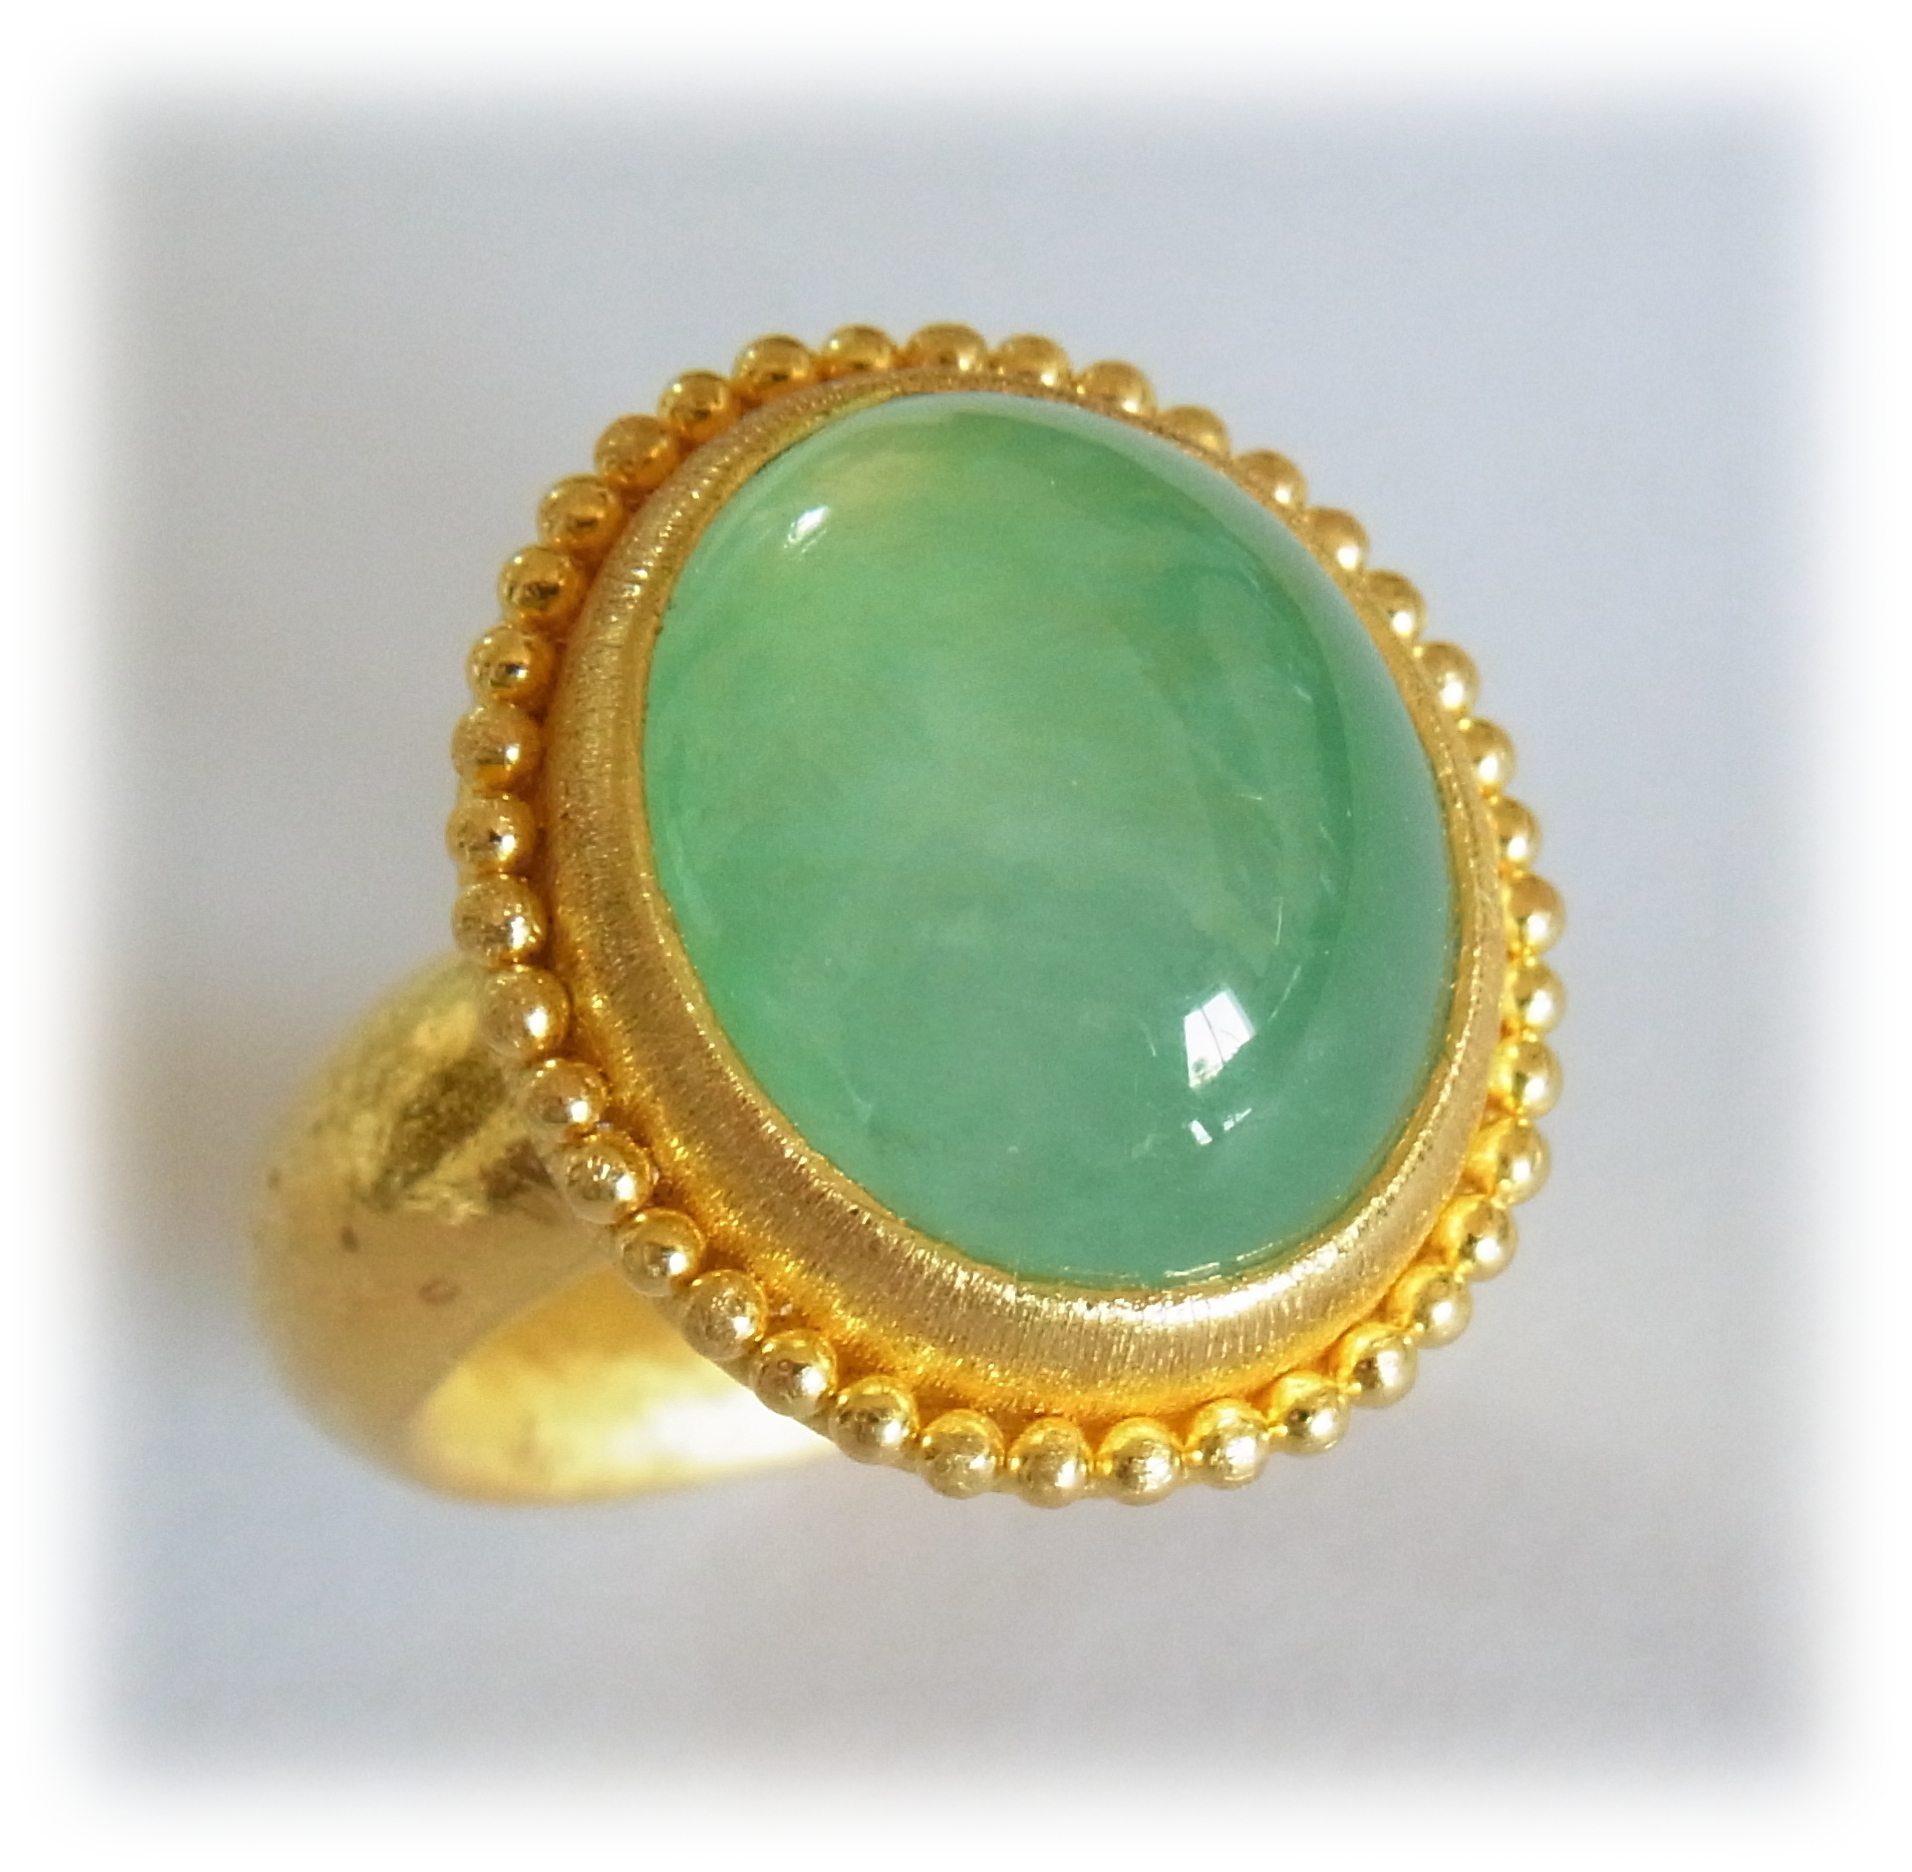 Oval-cabochon Jadeite ring with gold granulation